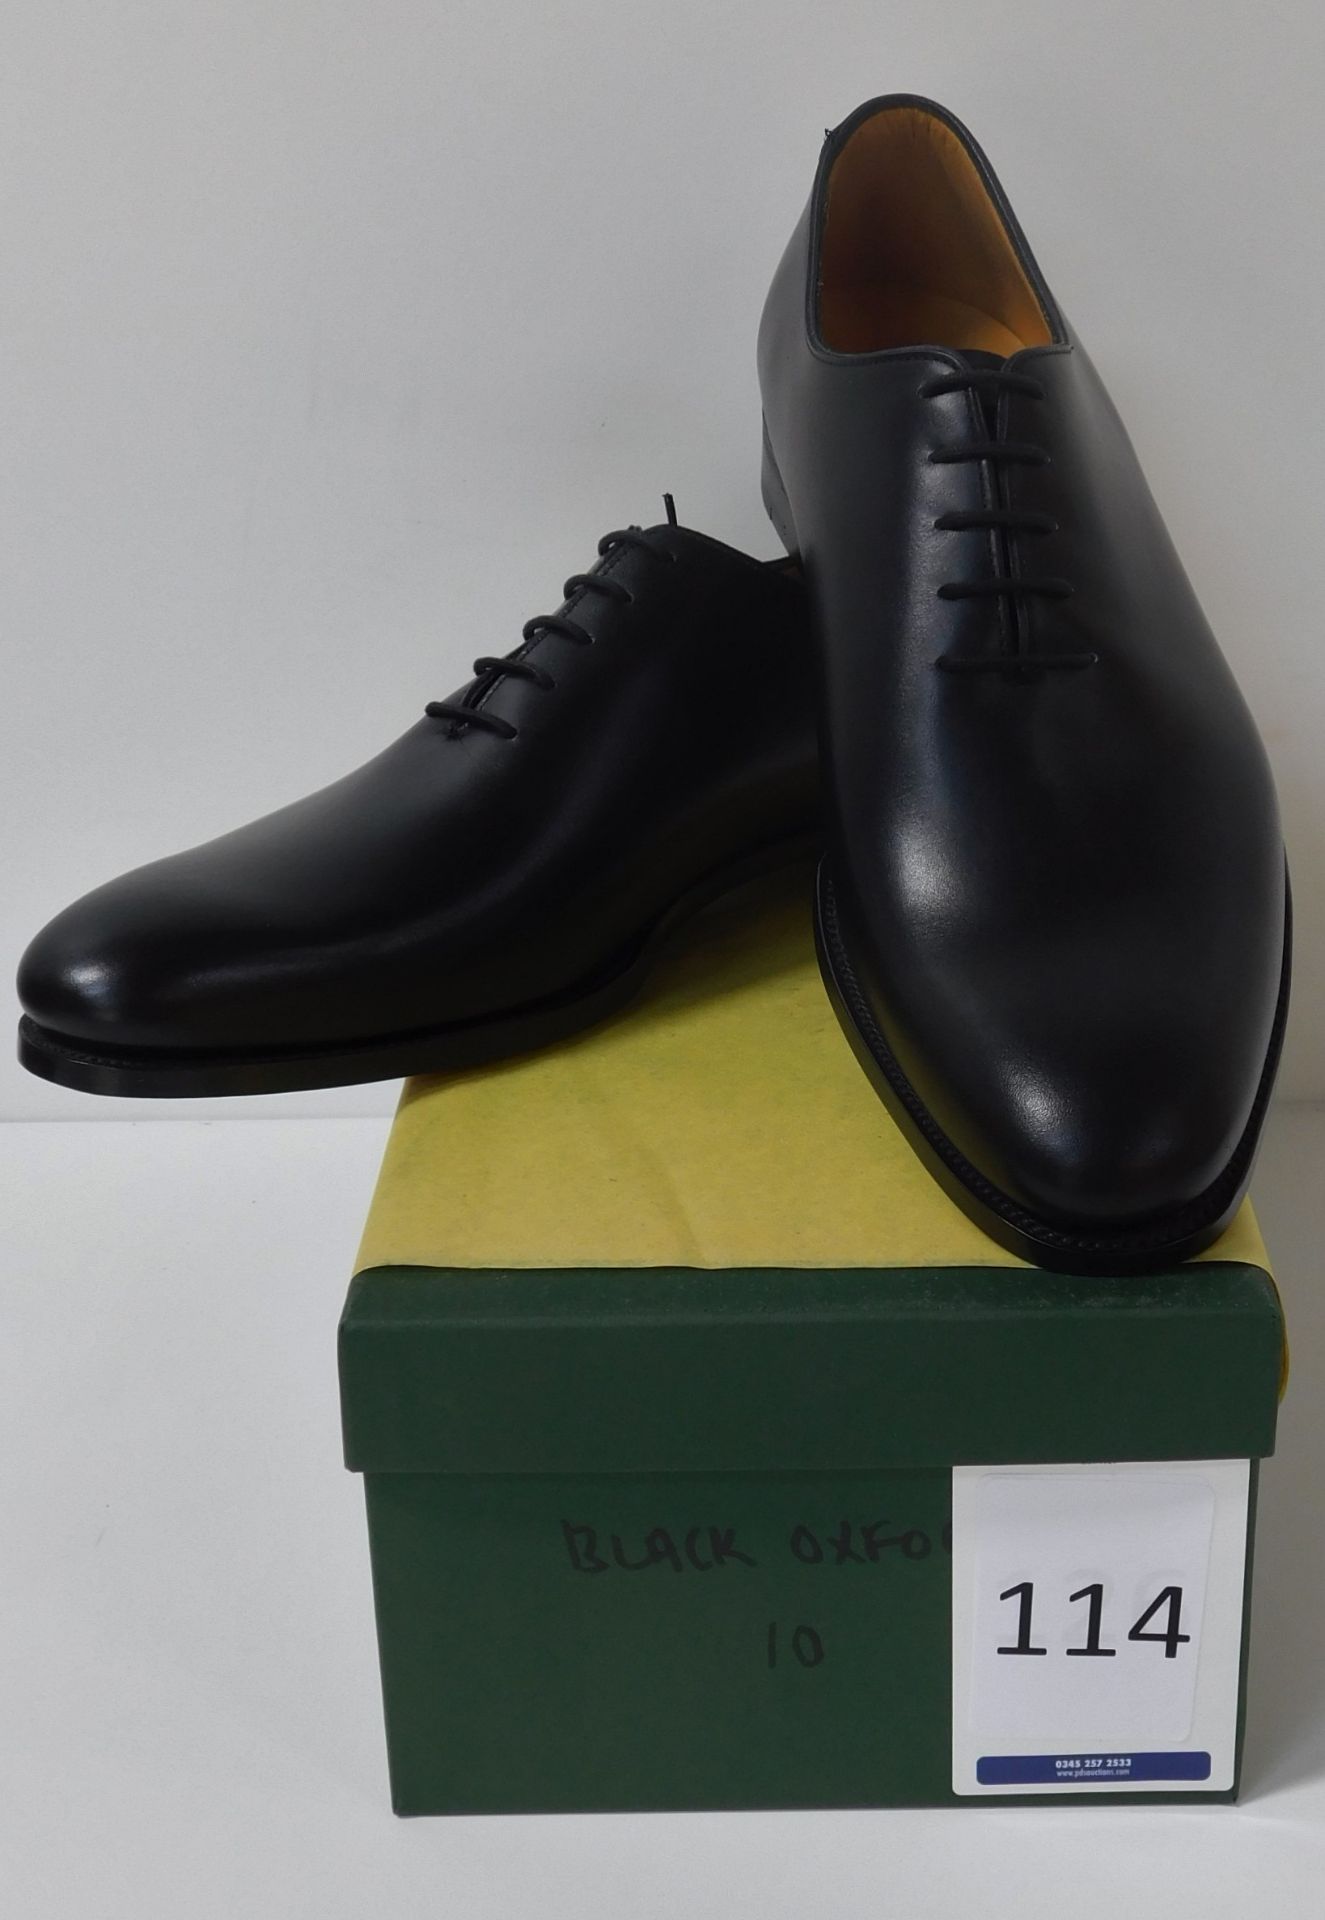 Pair of Alfred Sargent Black Oxford, Size 10 (Slight Seconds) (Location: Brentwood - See General